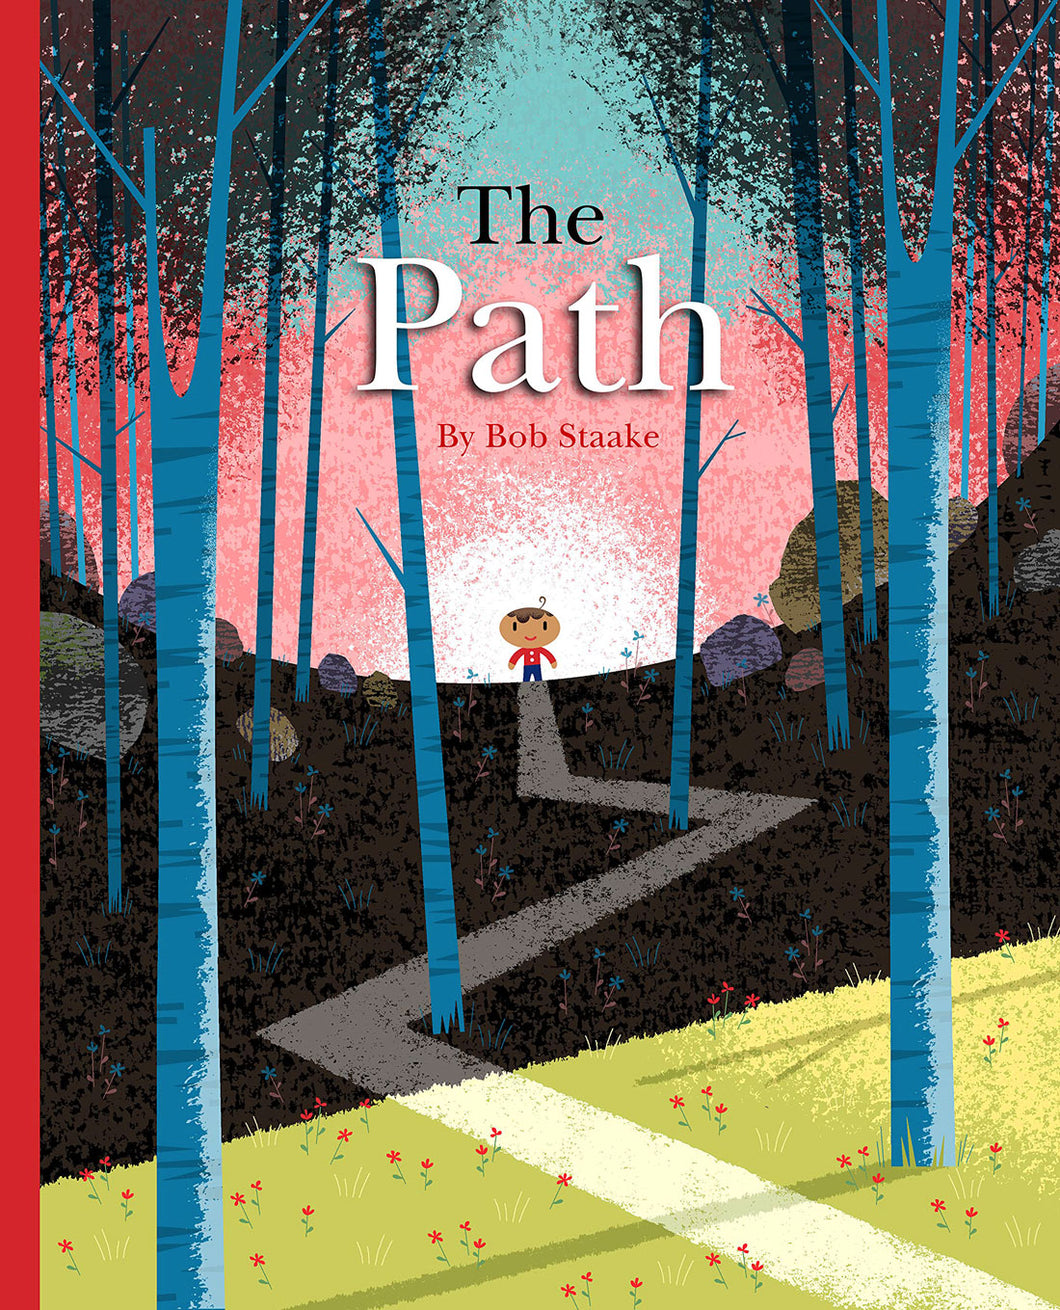 The Path by Bob Staake / Hardcover- NEW BOOK